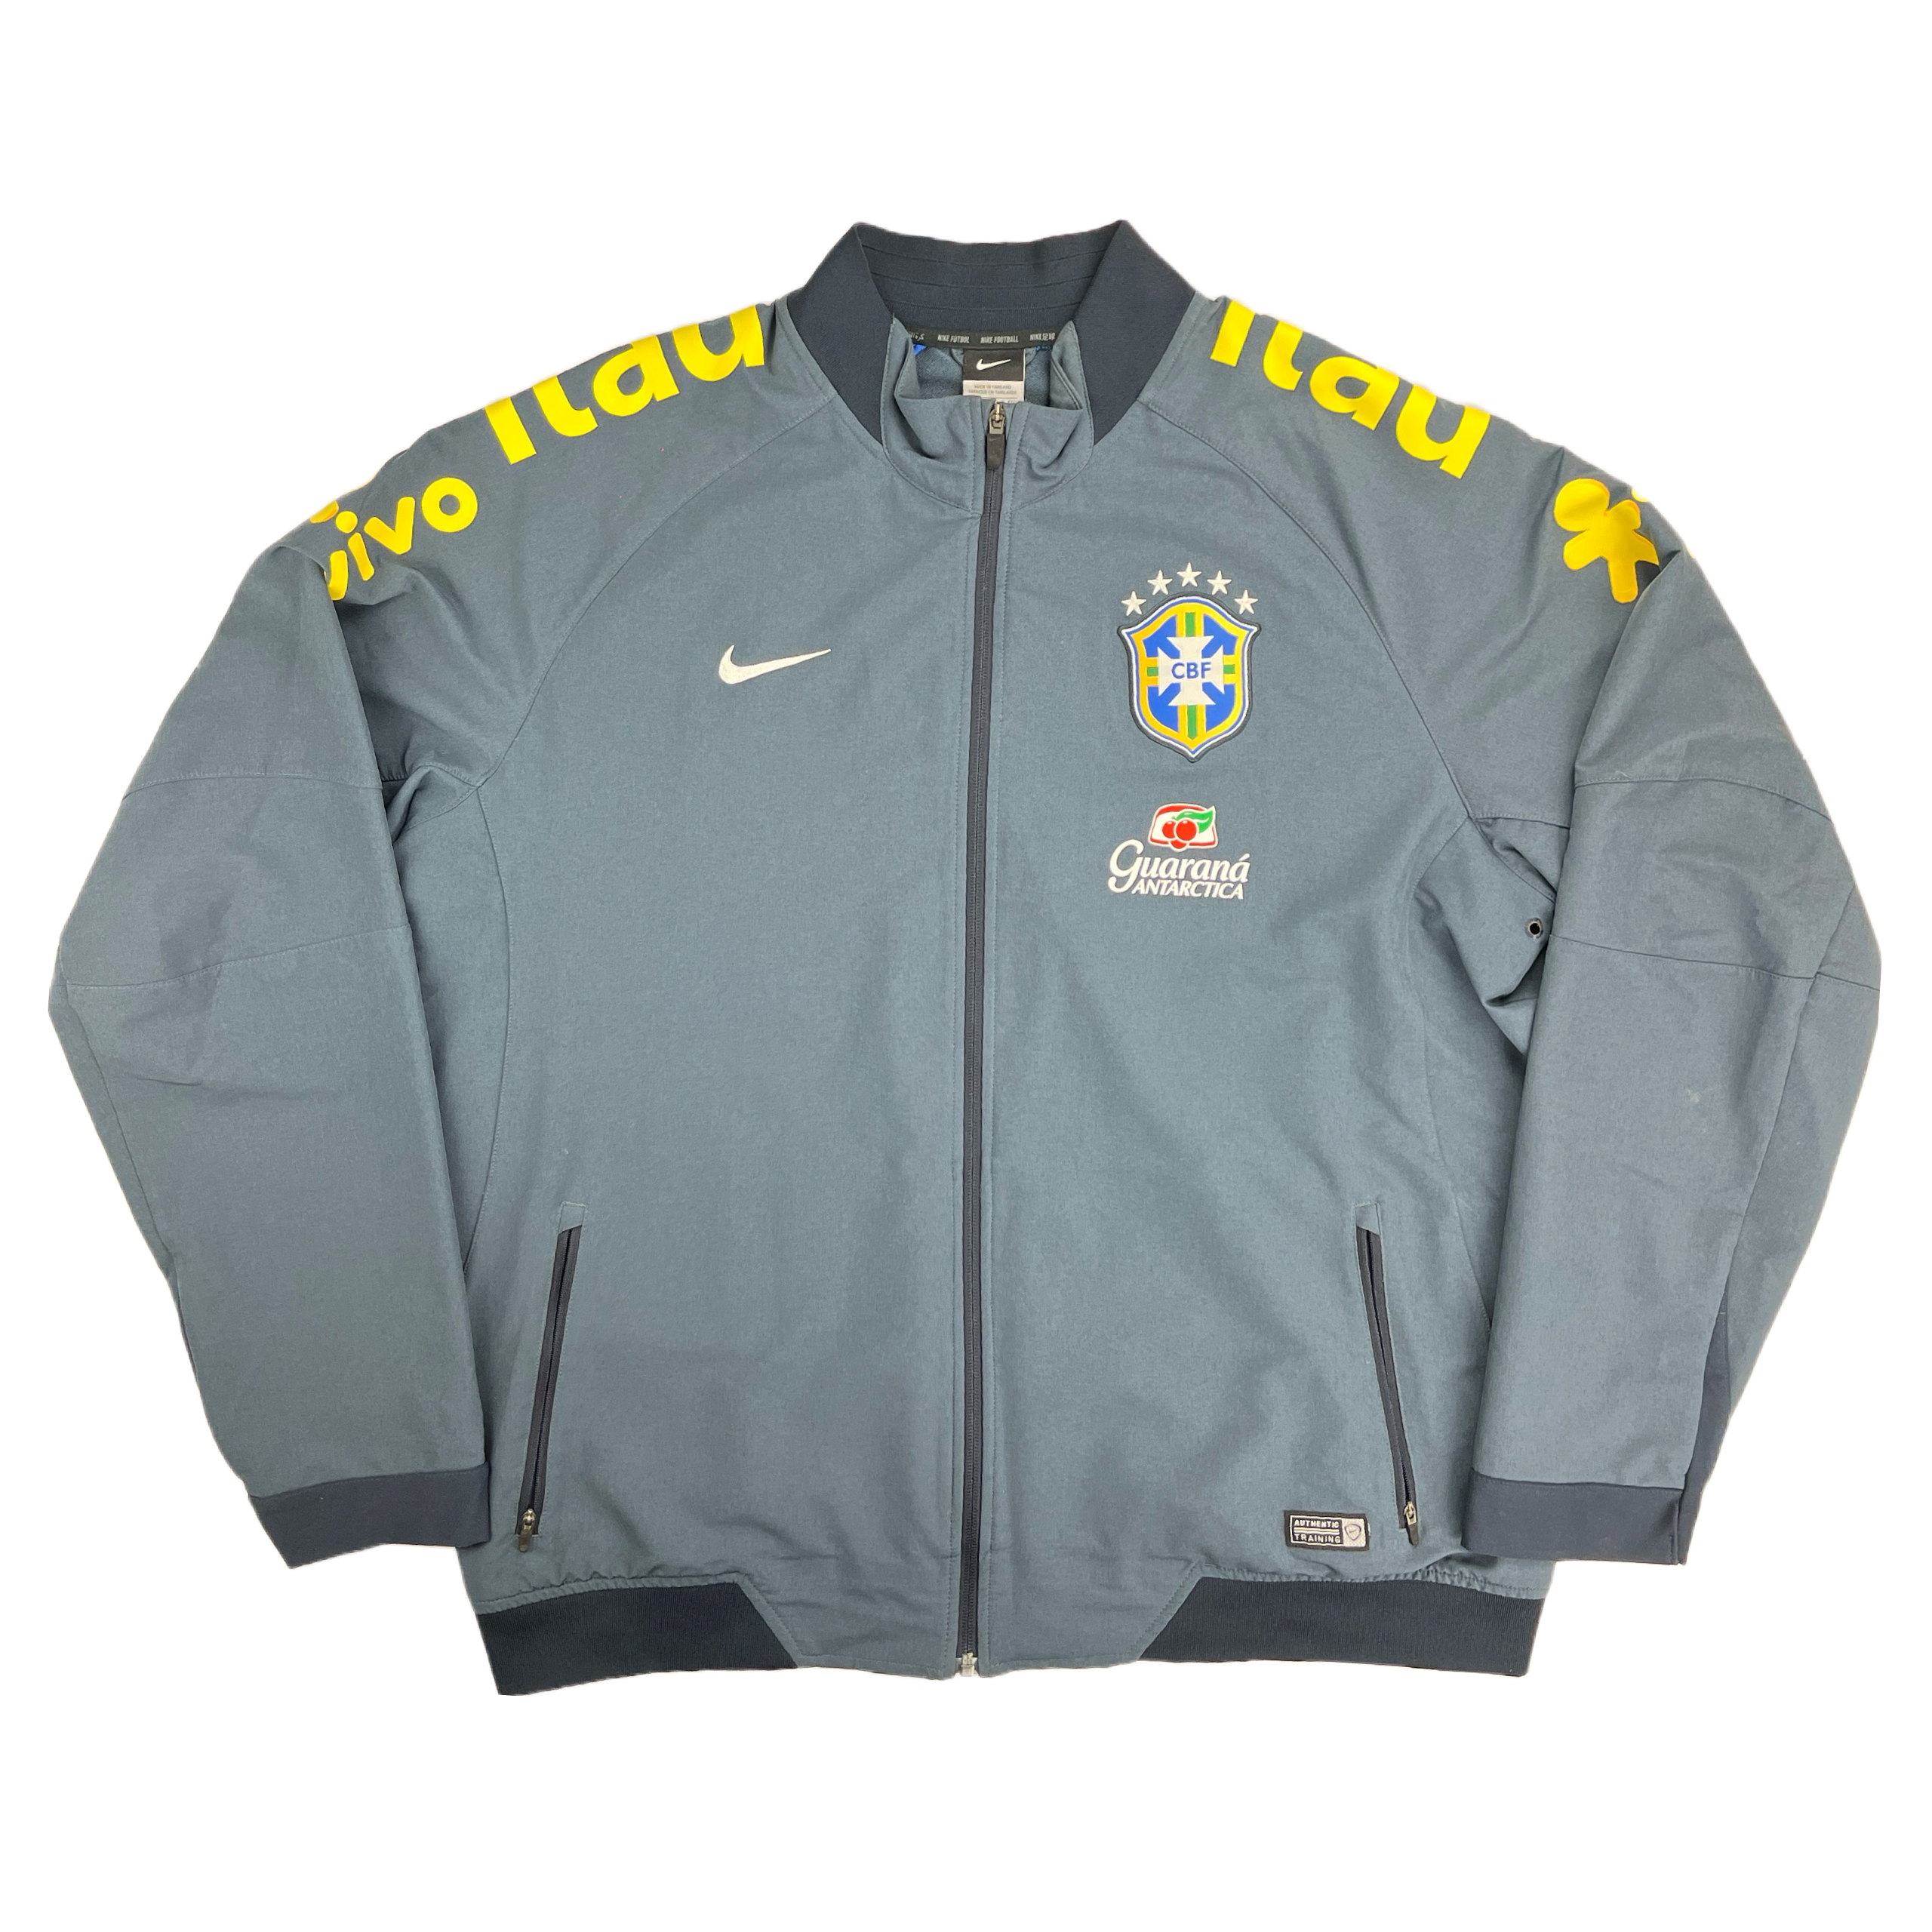 Brazil 2013 Player Issue Jacket